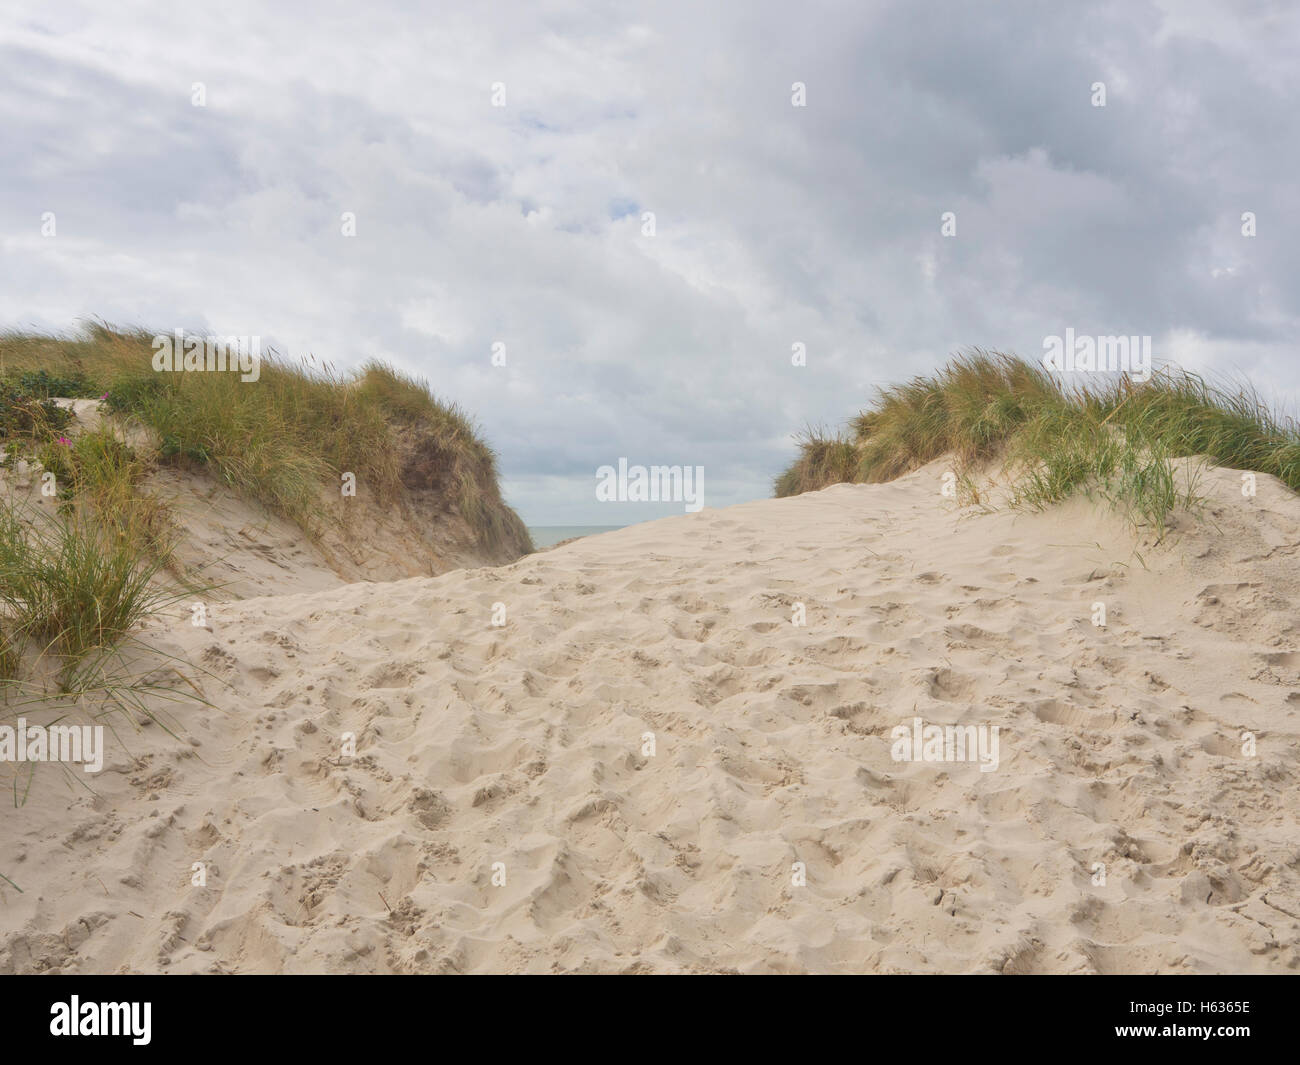 The Danish west coast is dominated by mile long beaches with fine white sand, view over the top of a well trodden sand dune Stock Photo